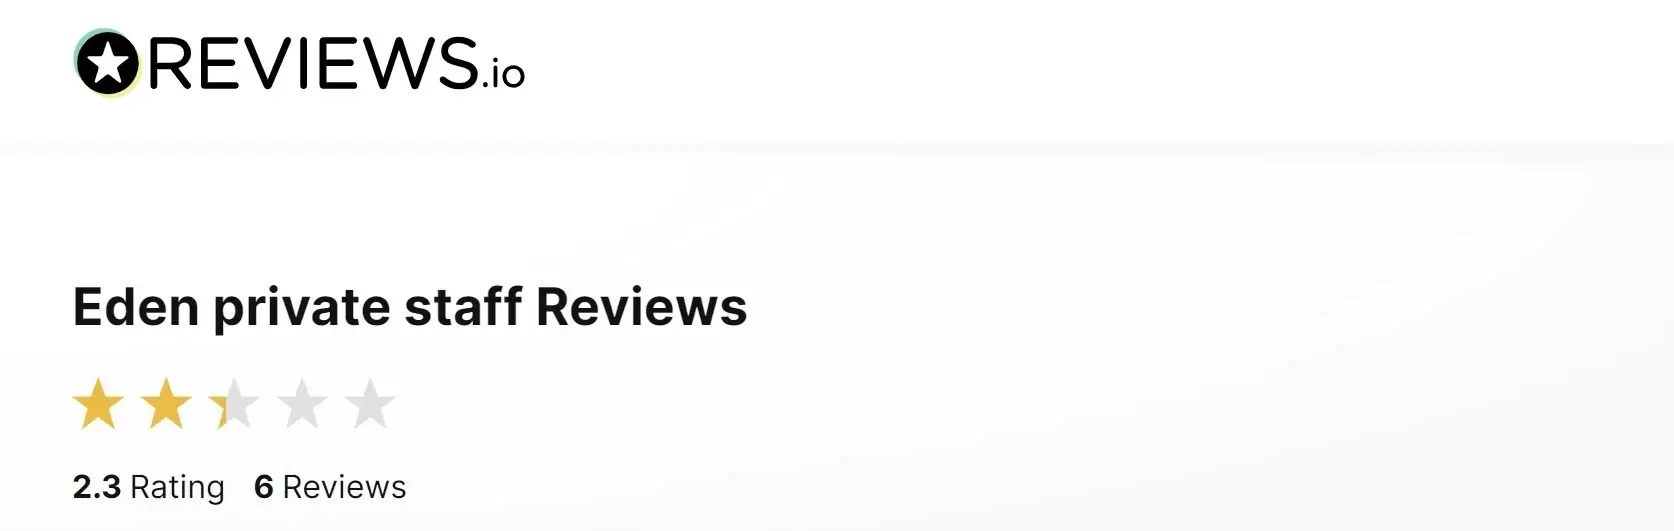 ratings on Reviews.io